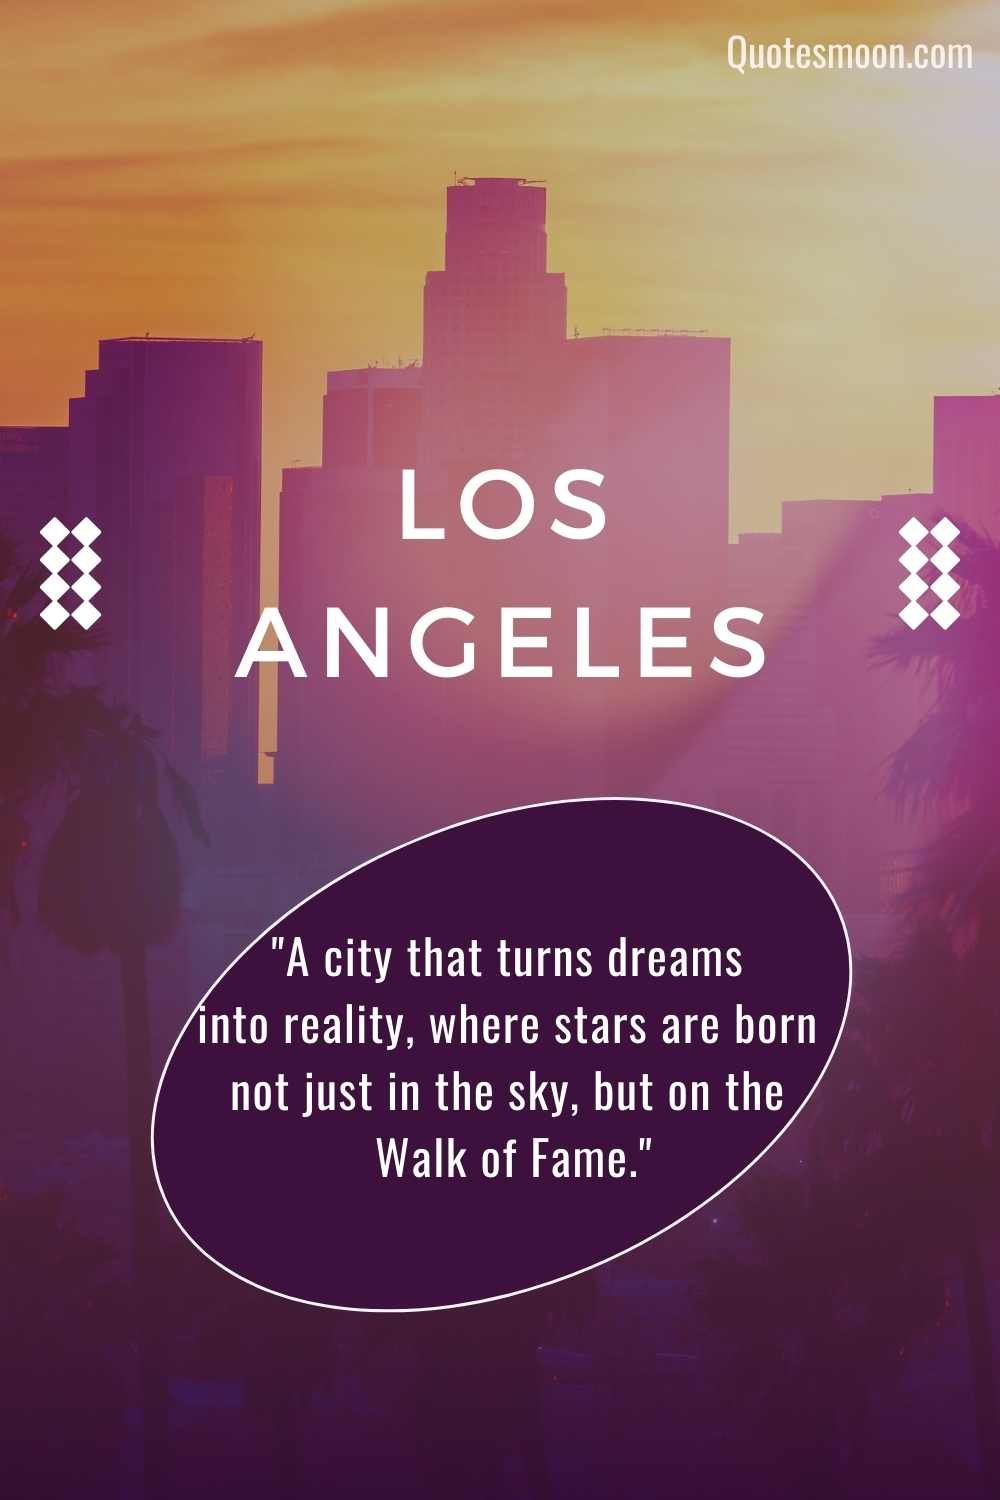 Famous Quotes About Los Angeles